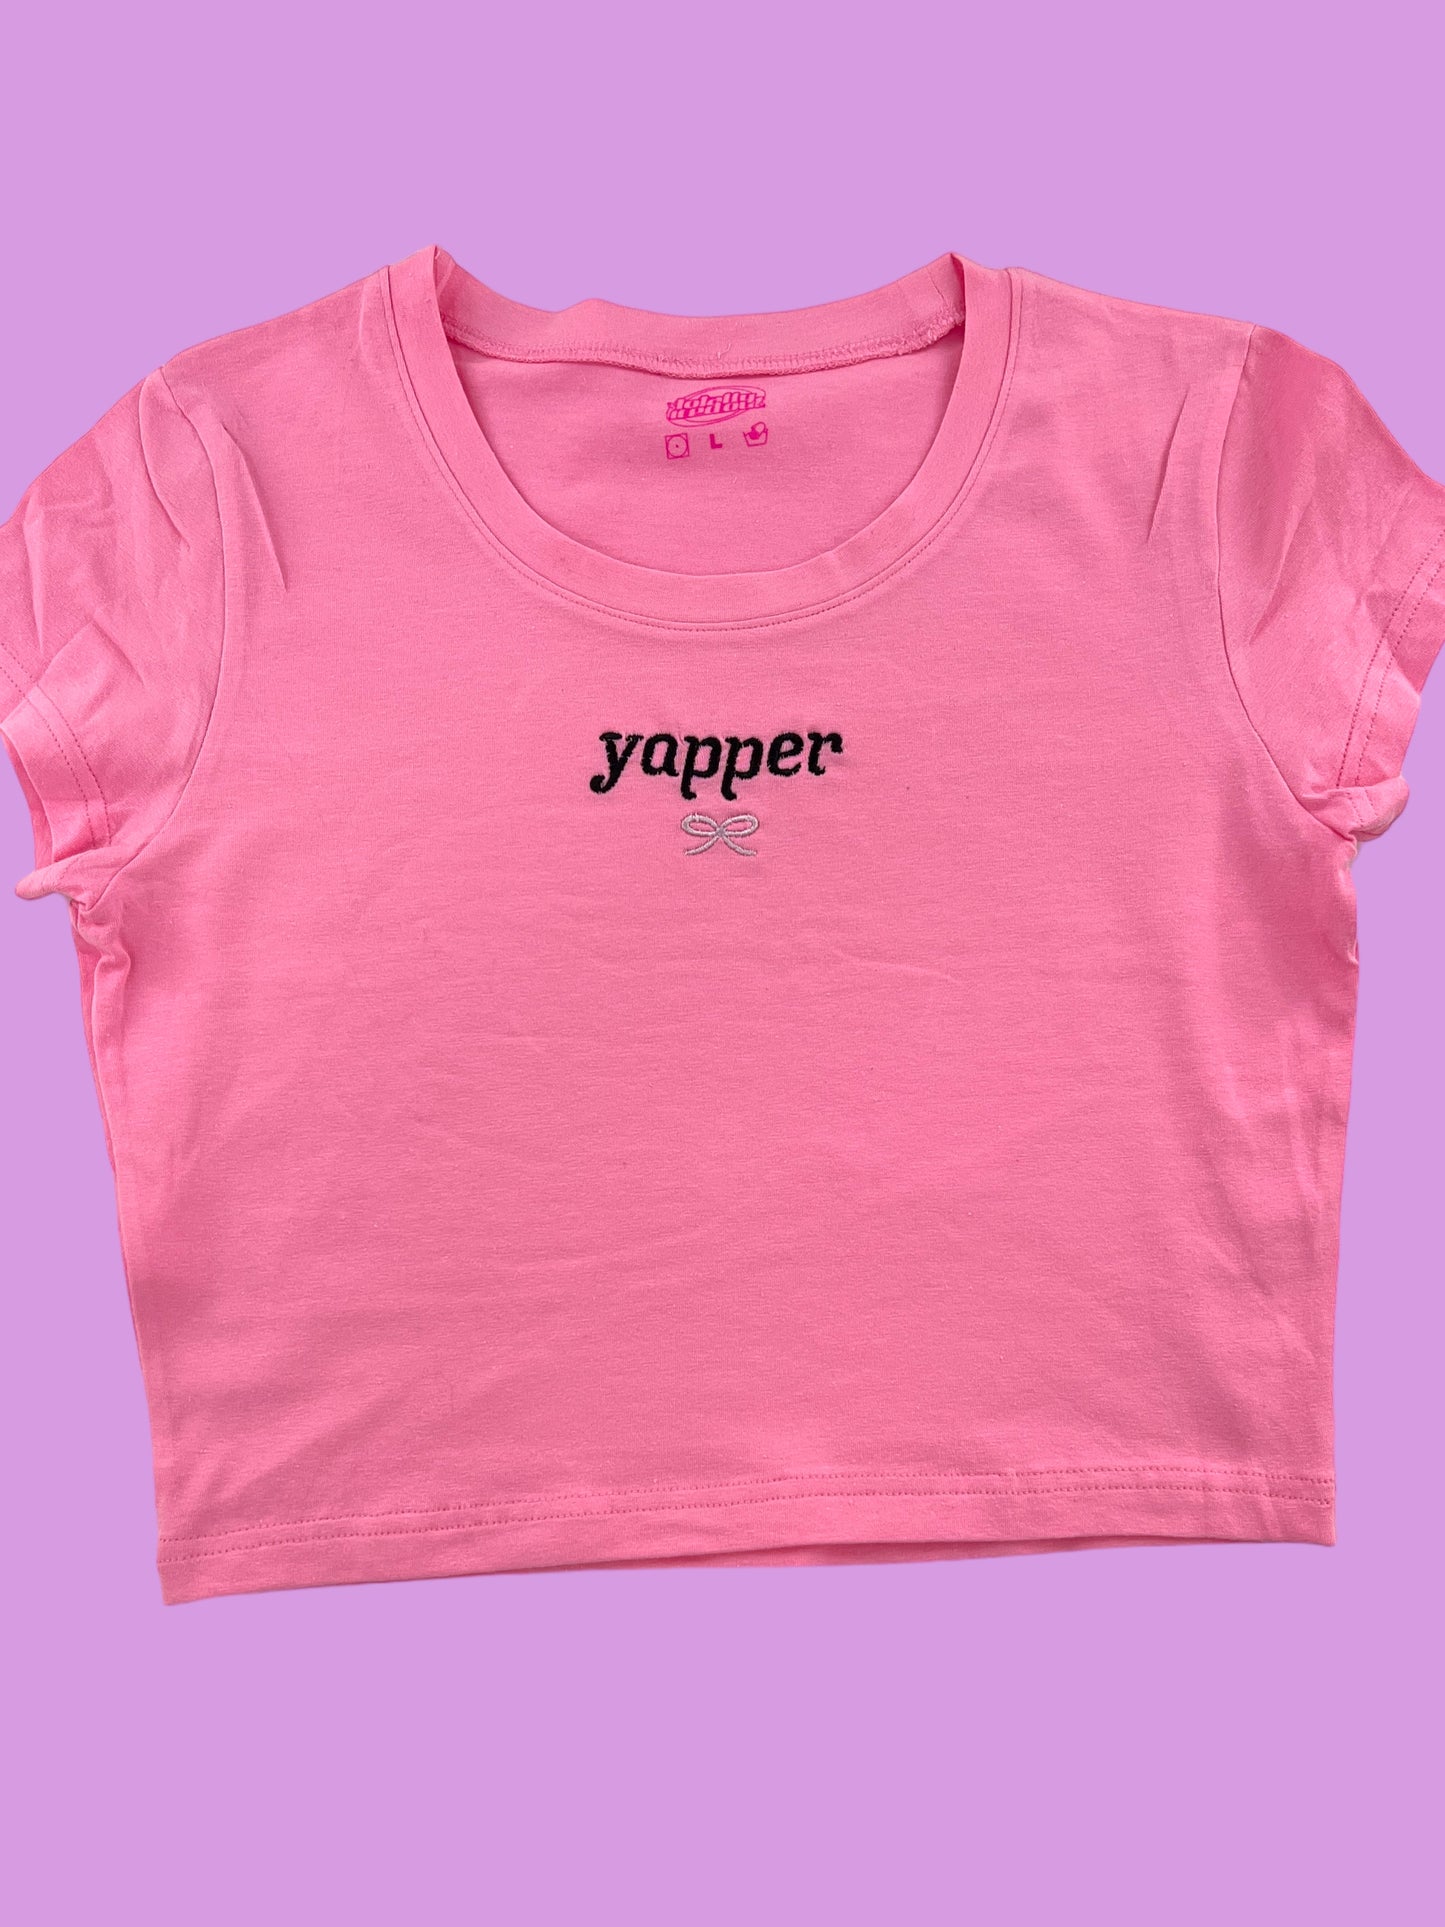 a pink t - shirt with the word yapper printed on it